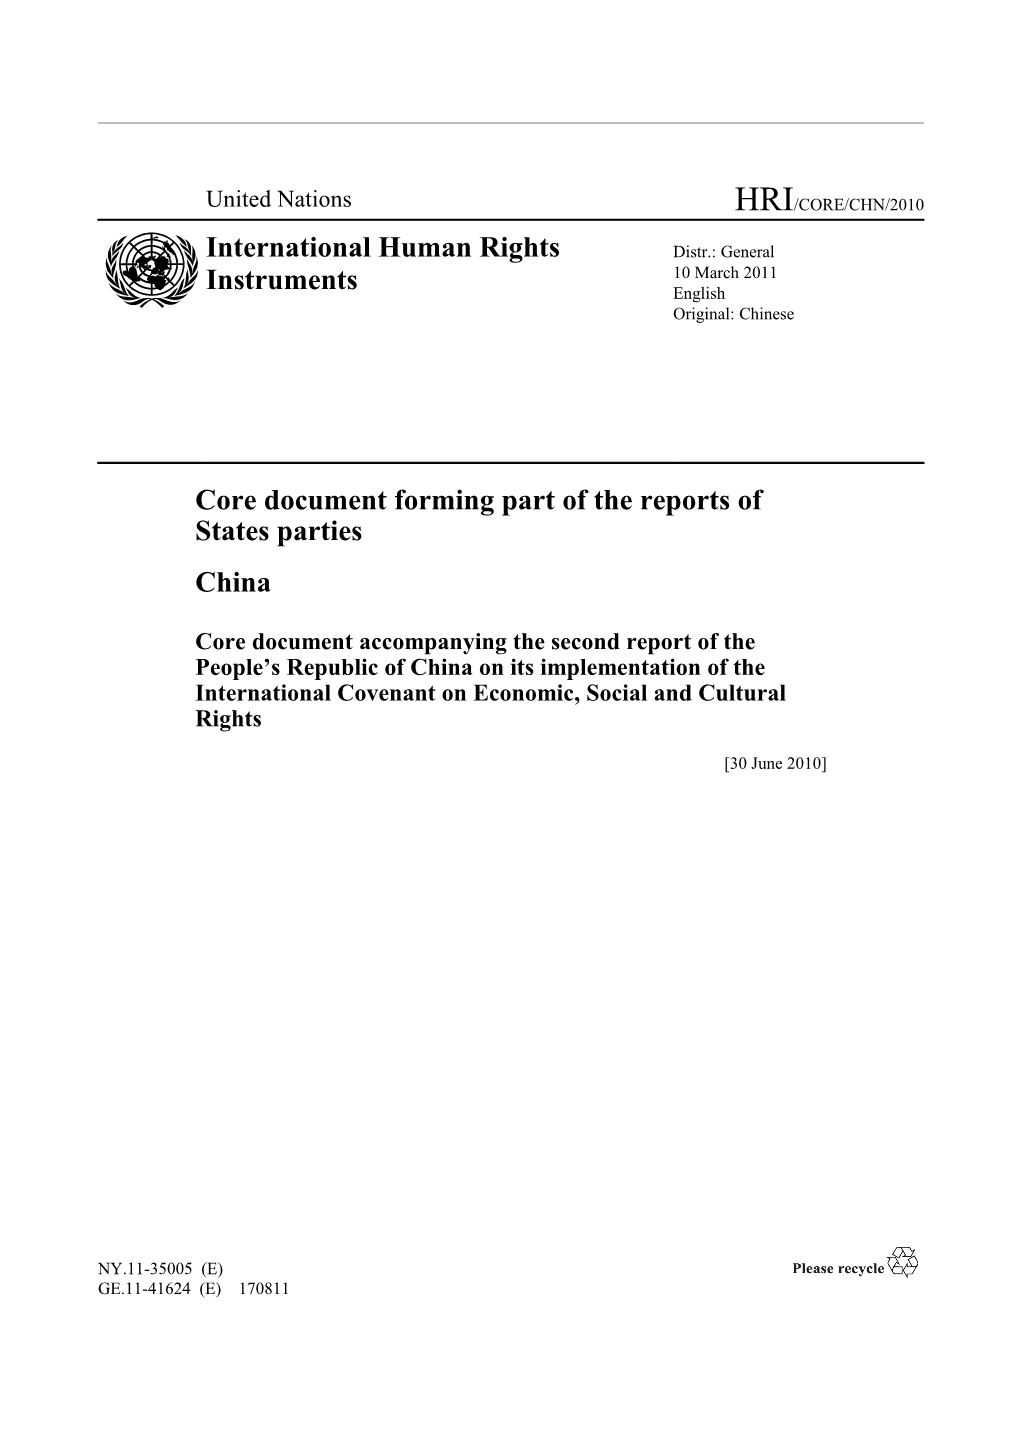 Core Document Forming Part of the Reports of States Parties